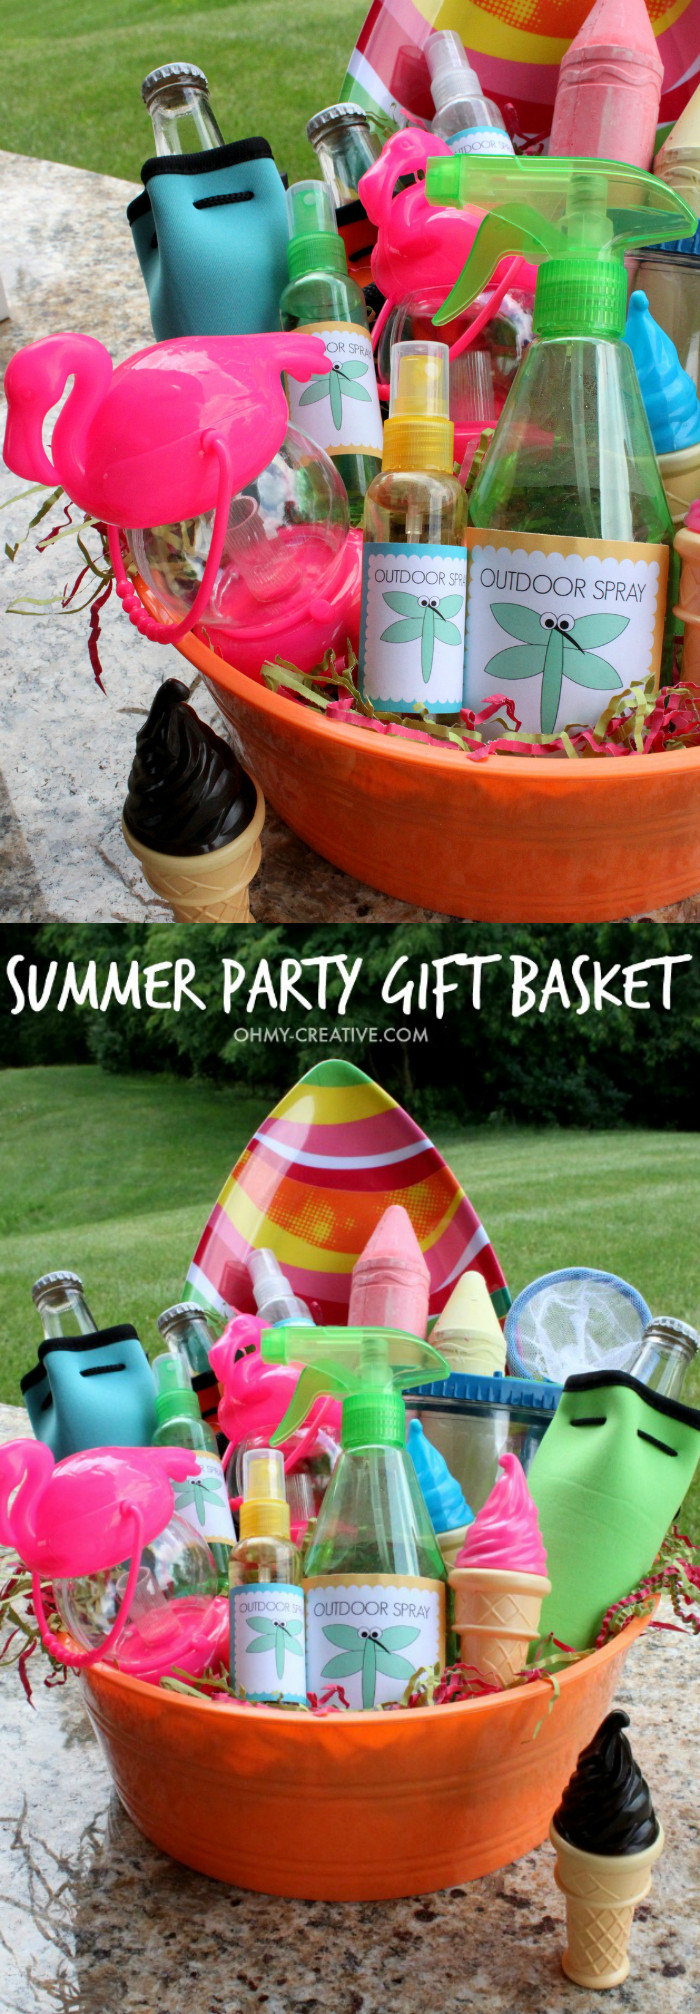 Fun Summer Gifts
 Summer Party Gift Basket Oh My Creative